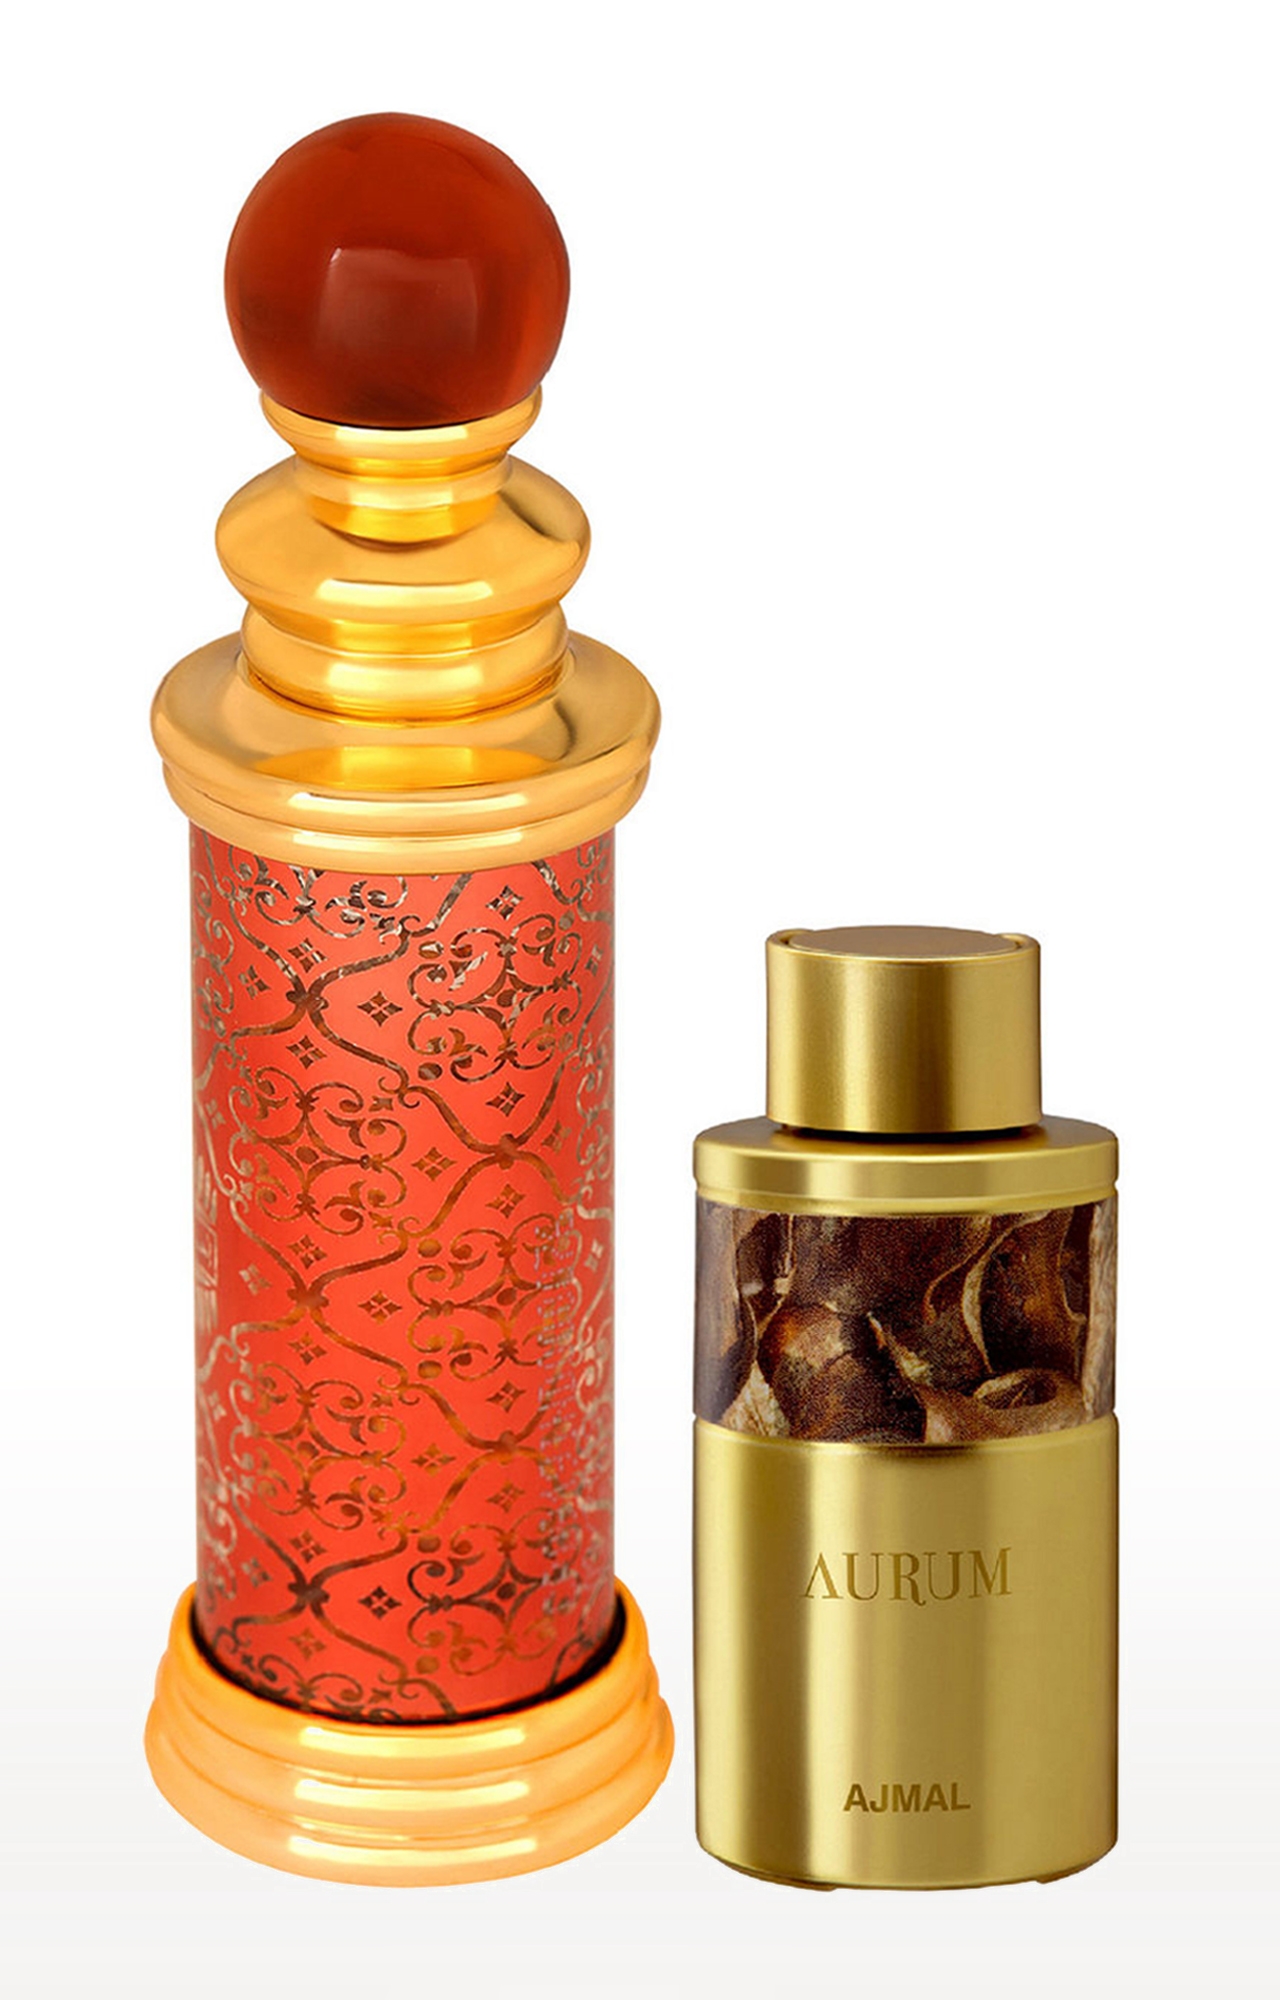 Ajmal | Ajmal Classic Oud Concentrated Perfume Oil Woody Oudh Alcohol- Attar 10Ml For Unisex And Aurum Concentrated Perfume Oil Fruity Floral Alcohol- Attar 10Ml For Women